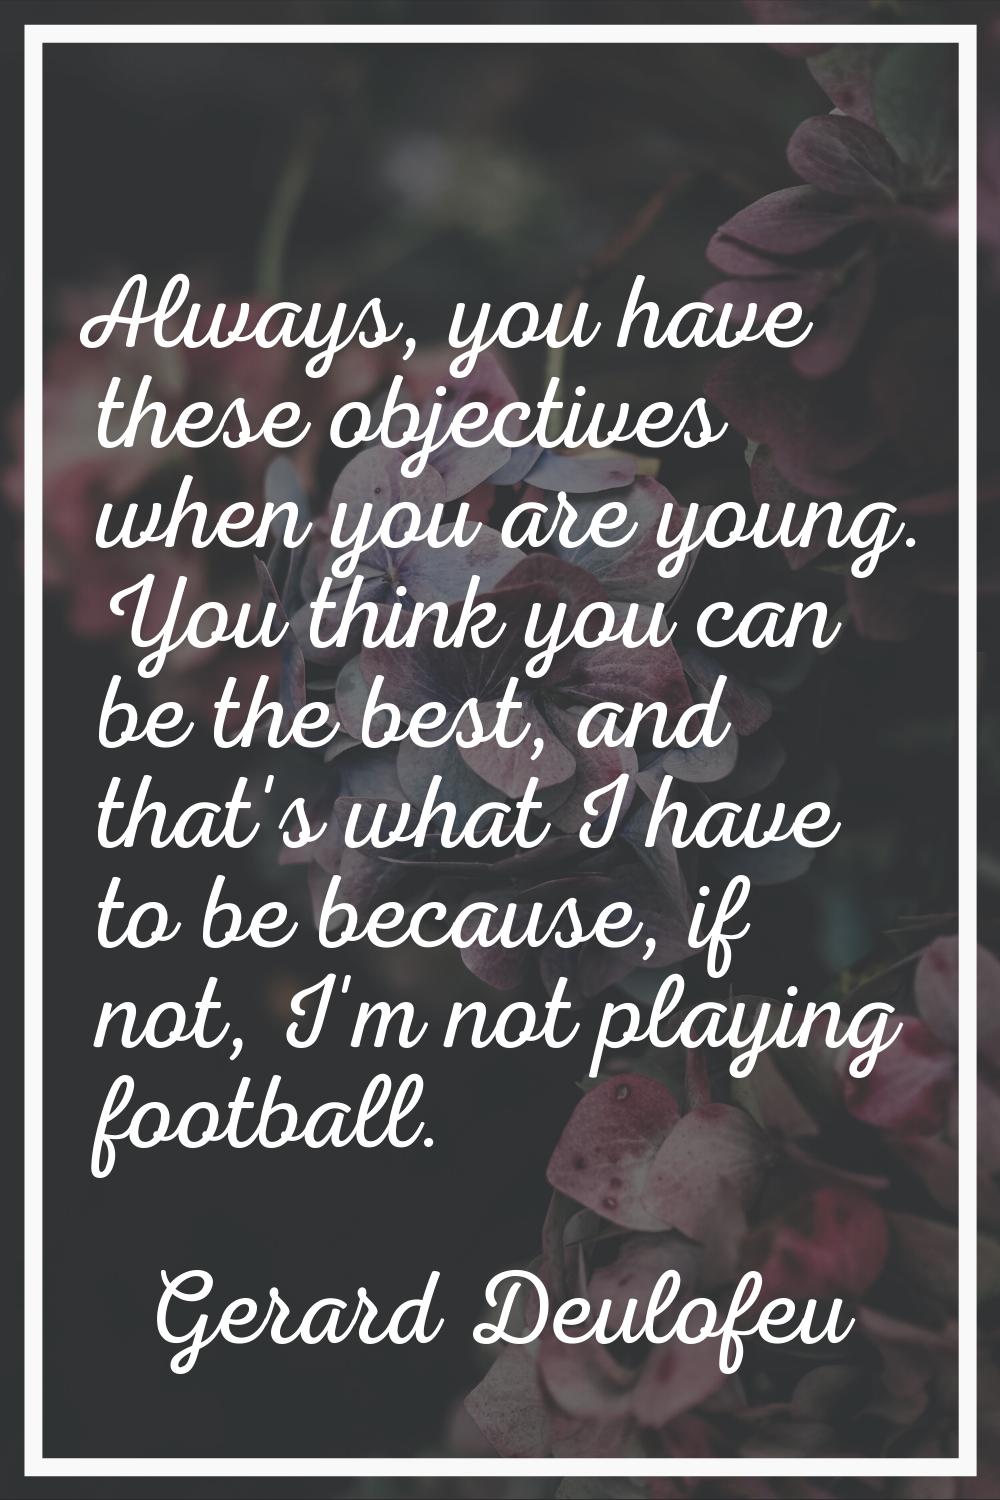 Always, you have these objectives when you are young. You think you can be the best, and that's wha